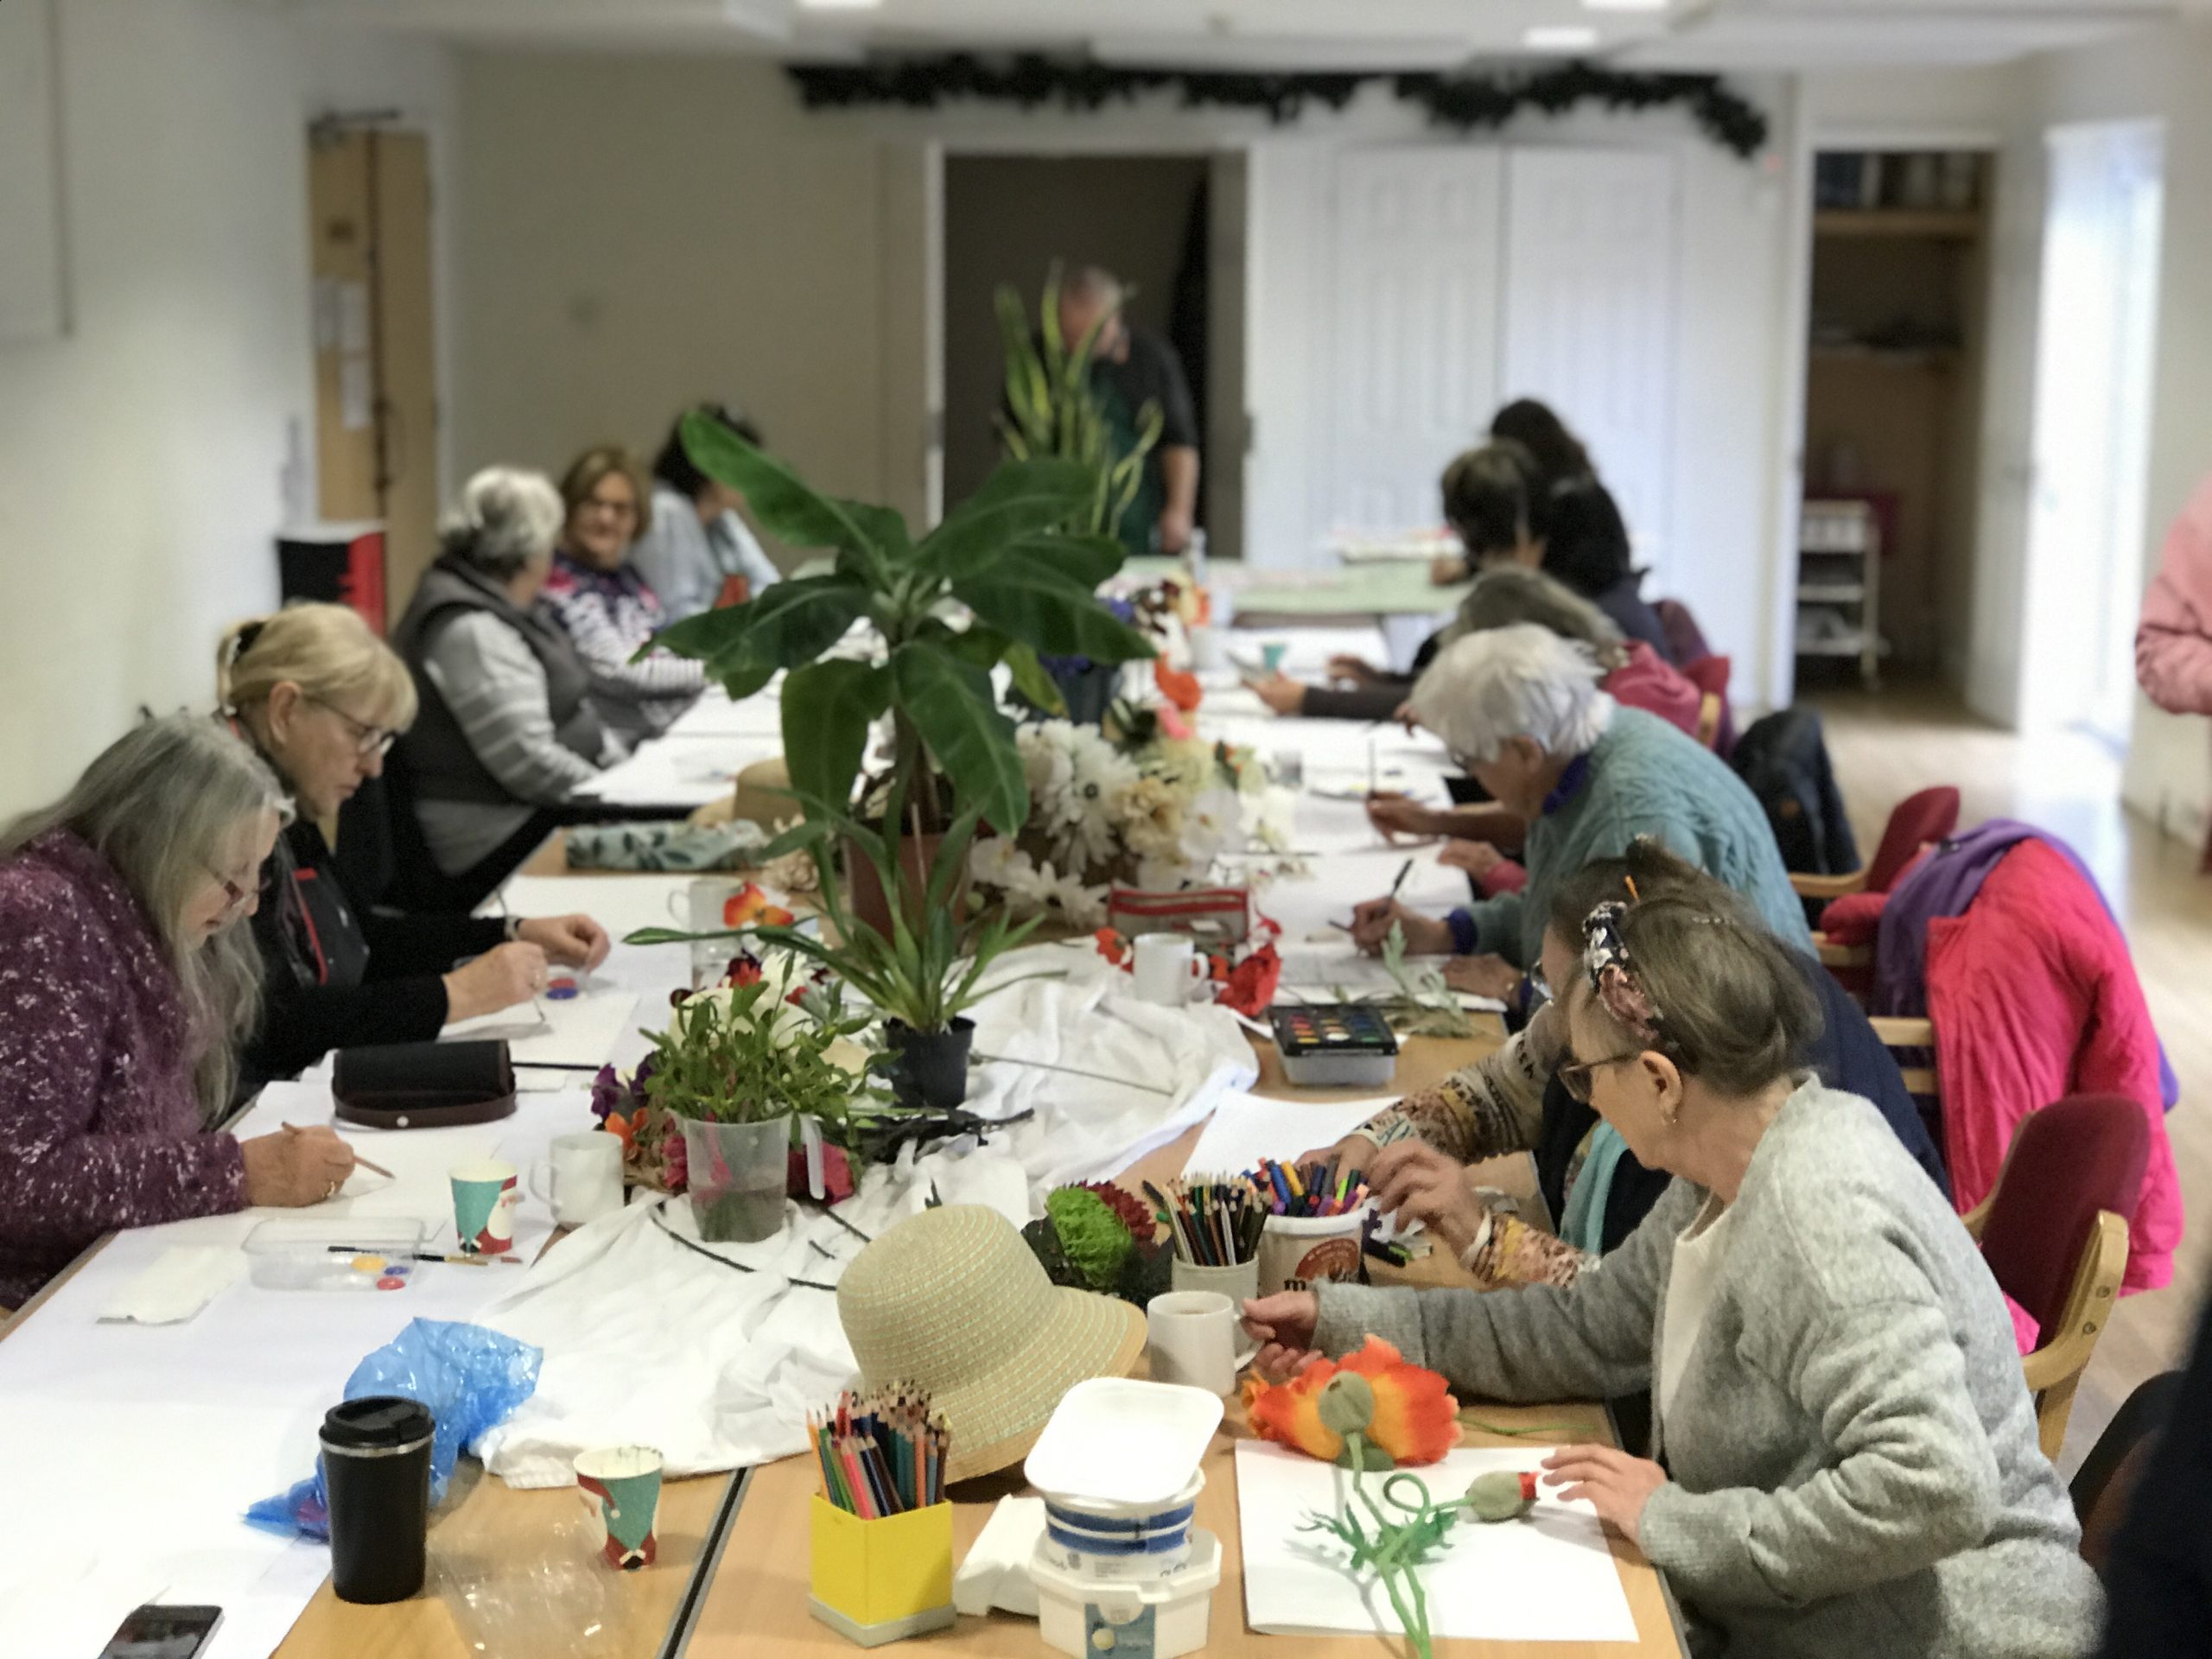 A group of elderly woman gathered around a long table getting creative drawing and painting the plants that are located in the middle of the table.